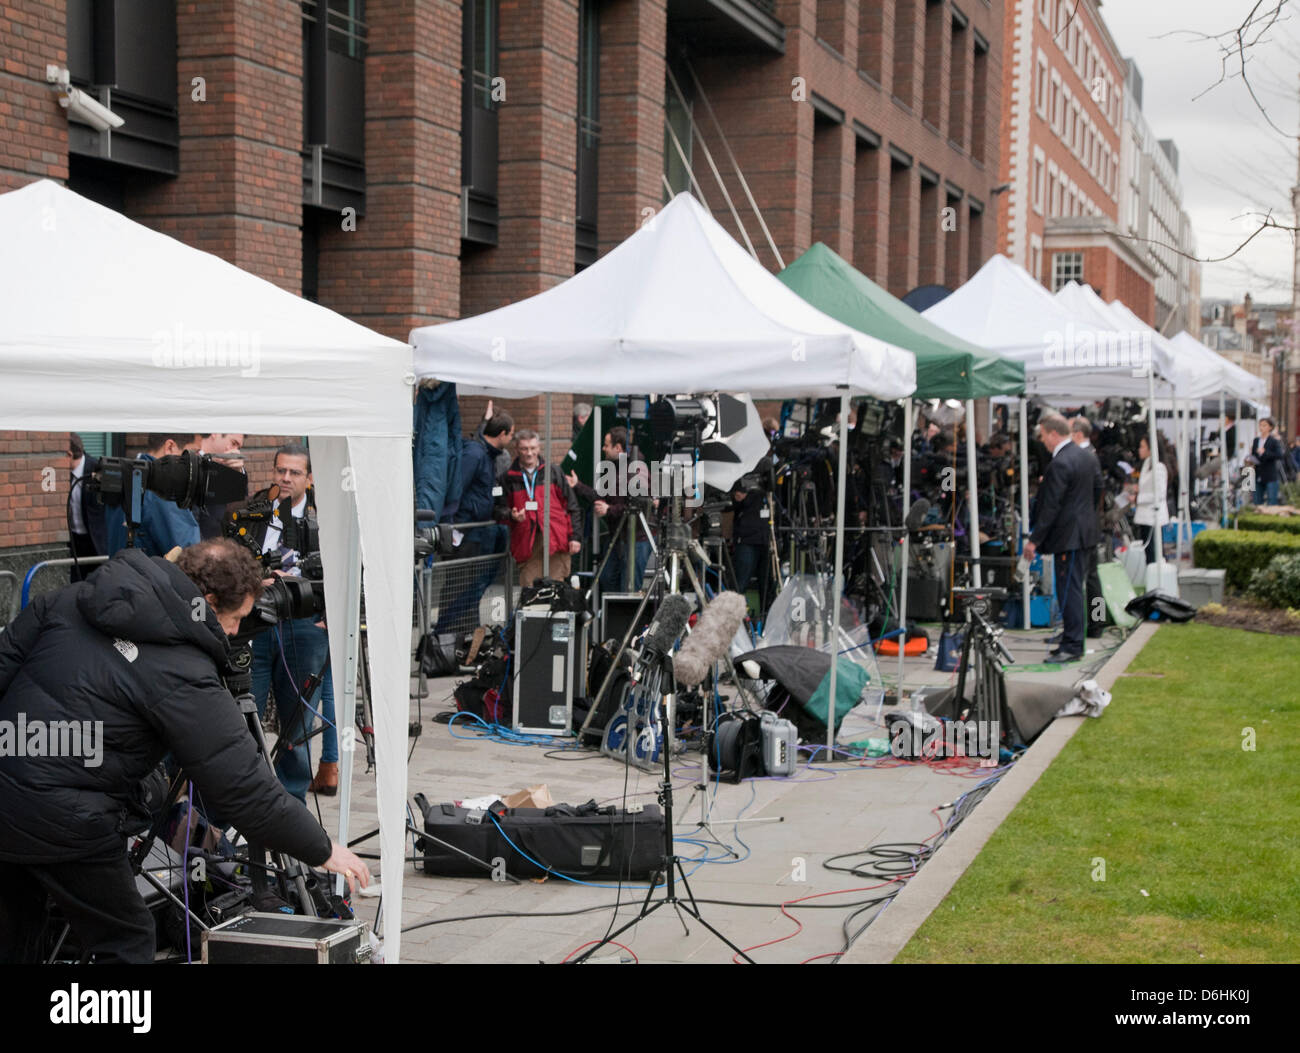 The media at the funeral of Baroness Thatcher held at St. Paul's Cathedral, London, UK on 17th April 2013. Margaret Thatcher also known as the 'Iron Lady' was the longest-serving British Prime Minister of the 20th century and is the only woman to have held the office. Stock Photo